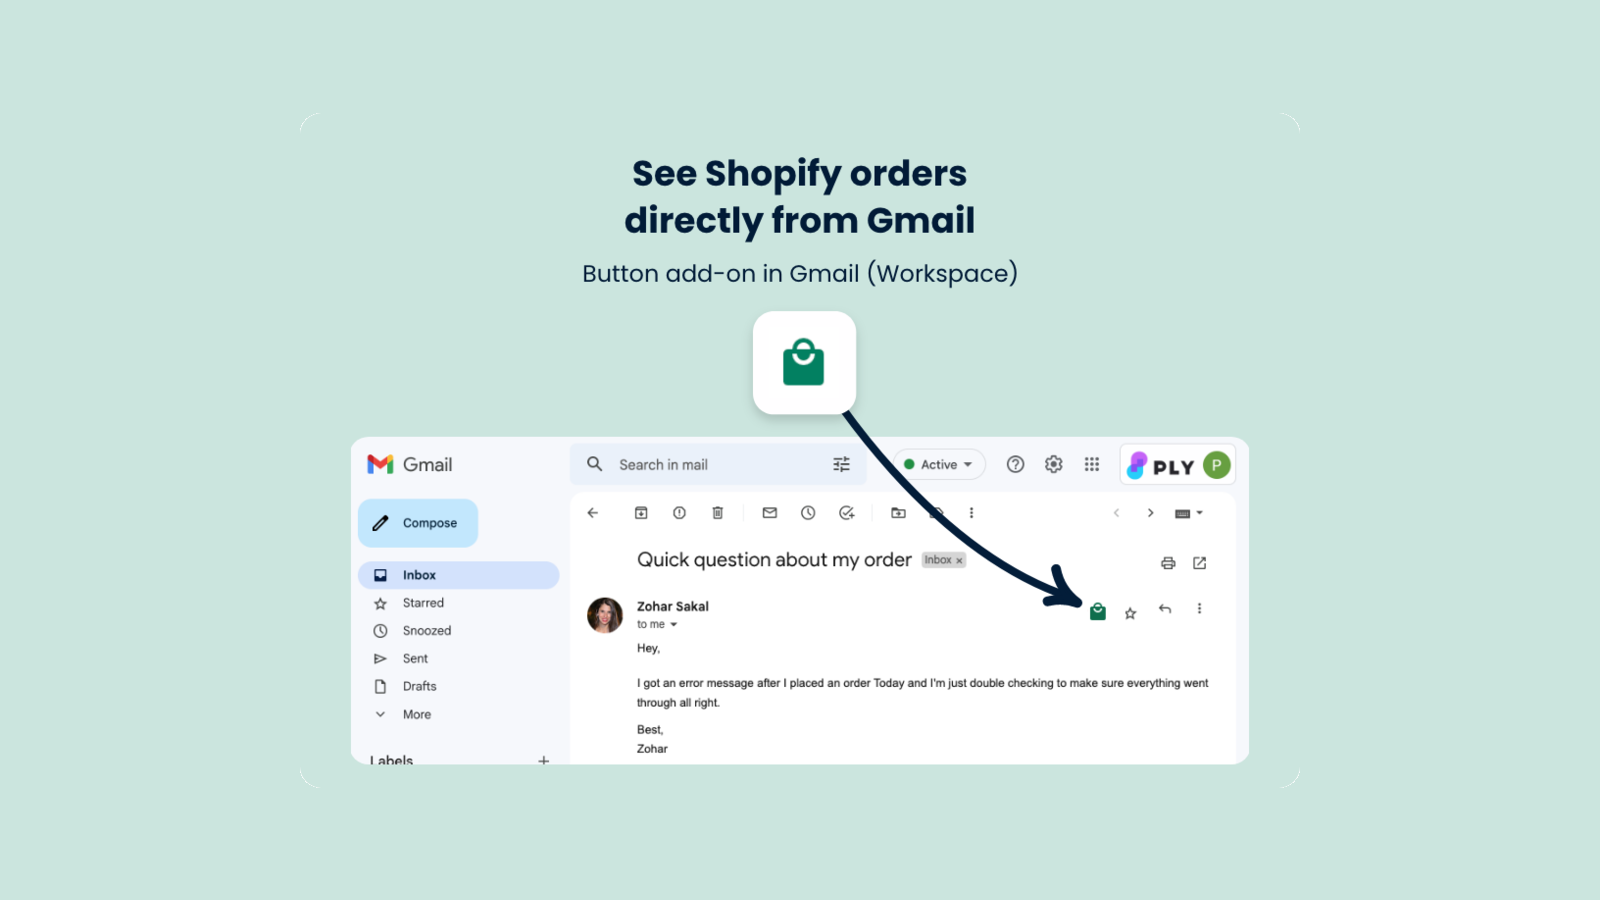 Build a feature that connects Shopify with your other apps.